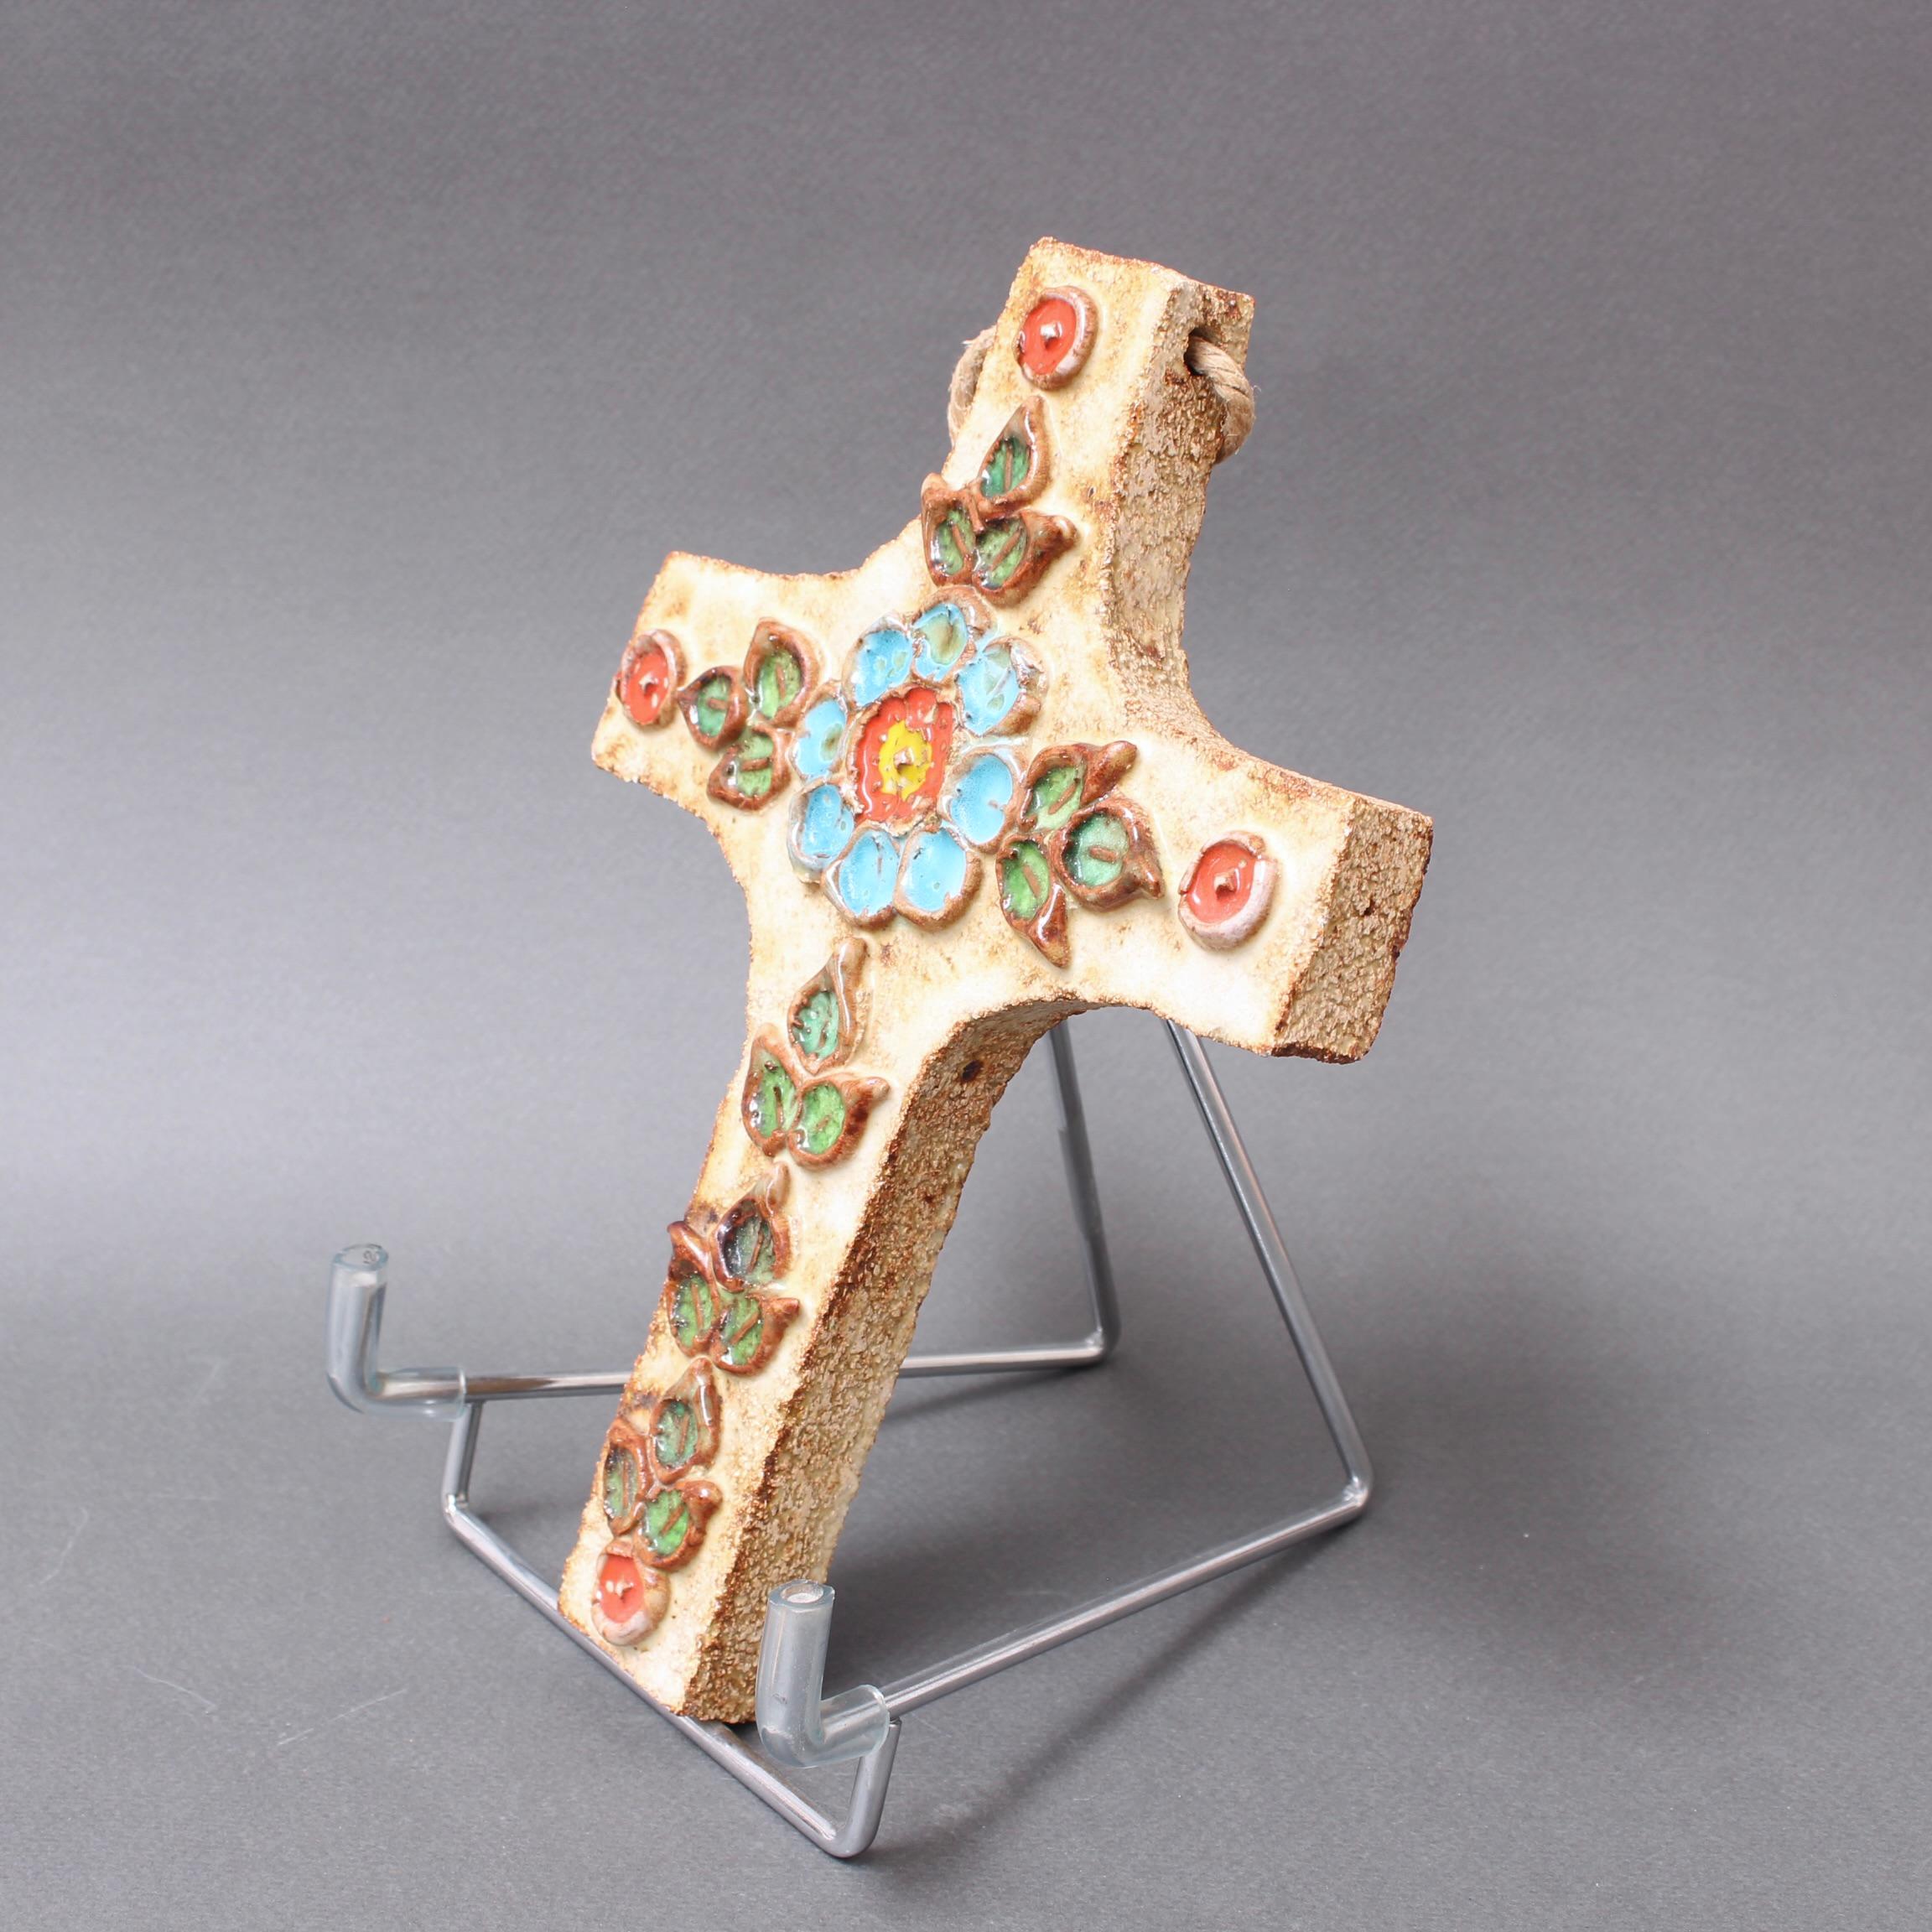 Vintage French Ceramic Flower-Motif Cross by La Roue (circa 1960s) For Sale 2